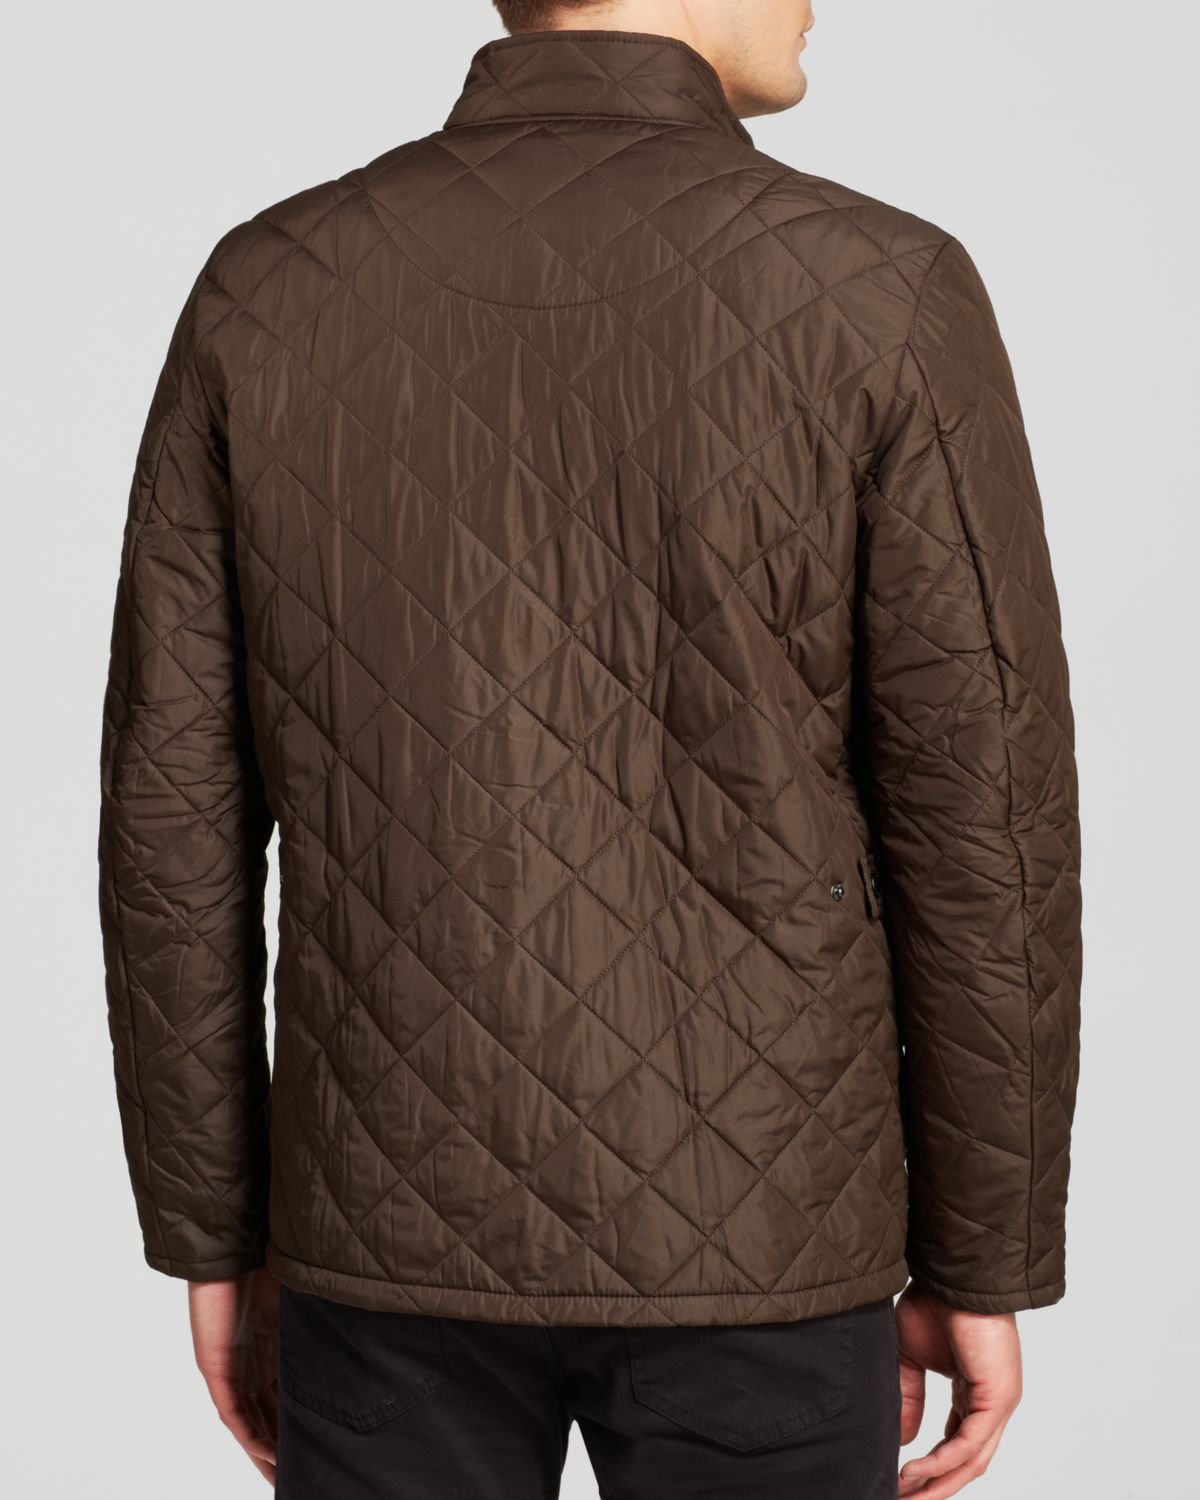 Barbour Chelsea Quilted Sports Jacket in Olive (Brown) for Men - Lyst